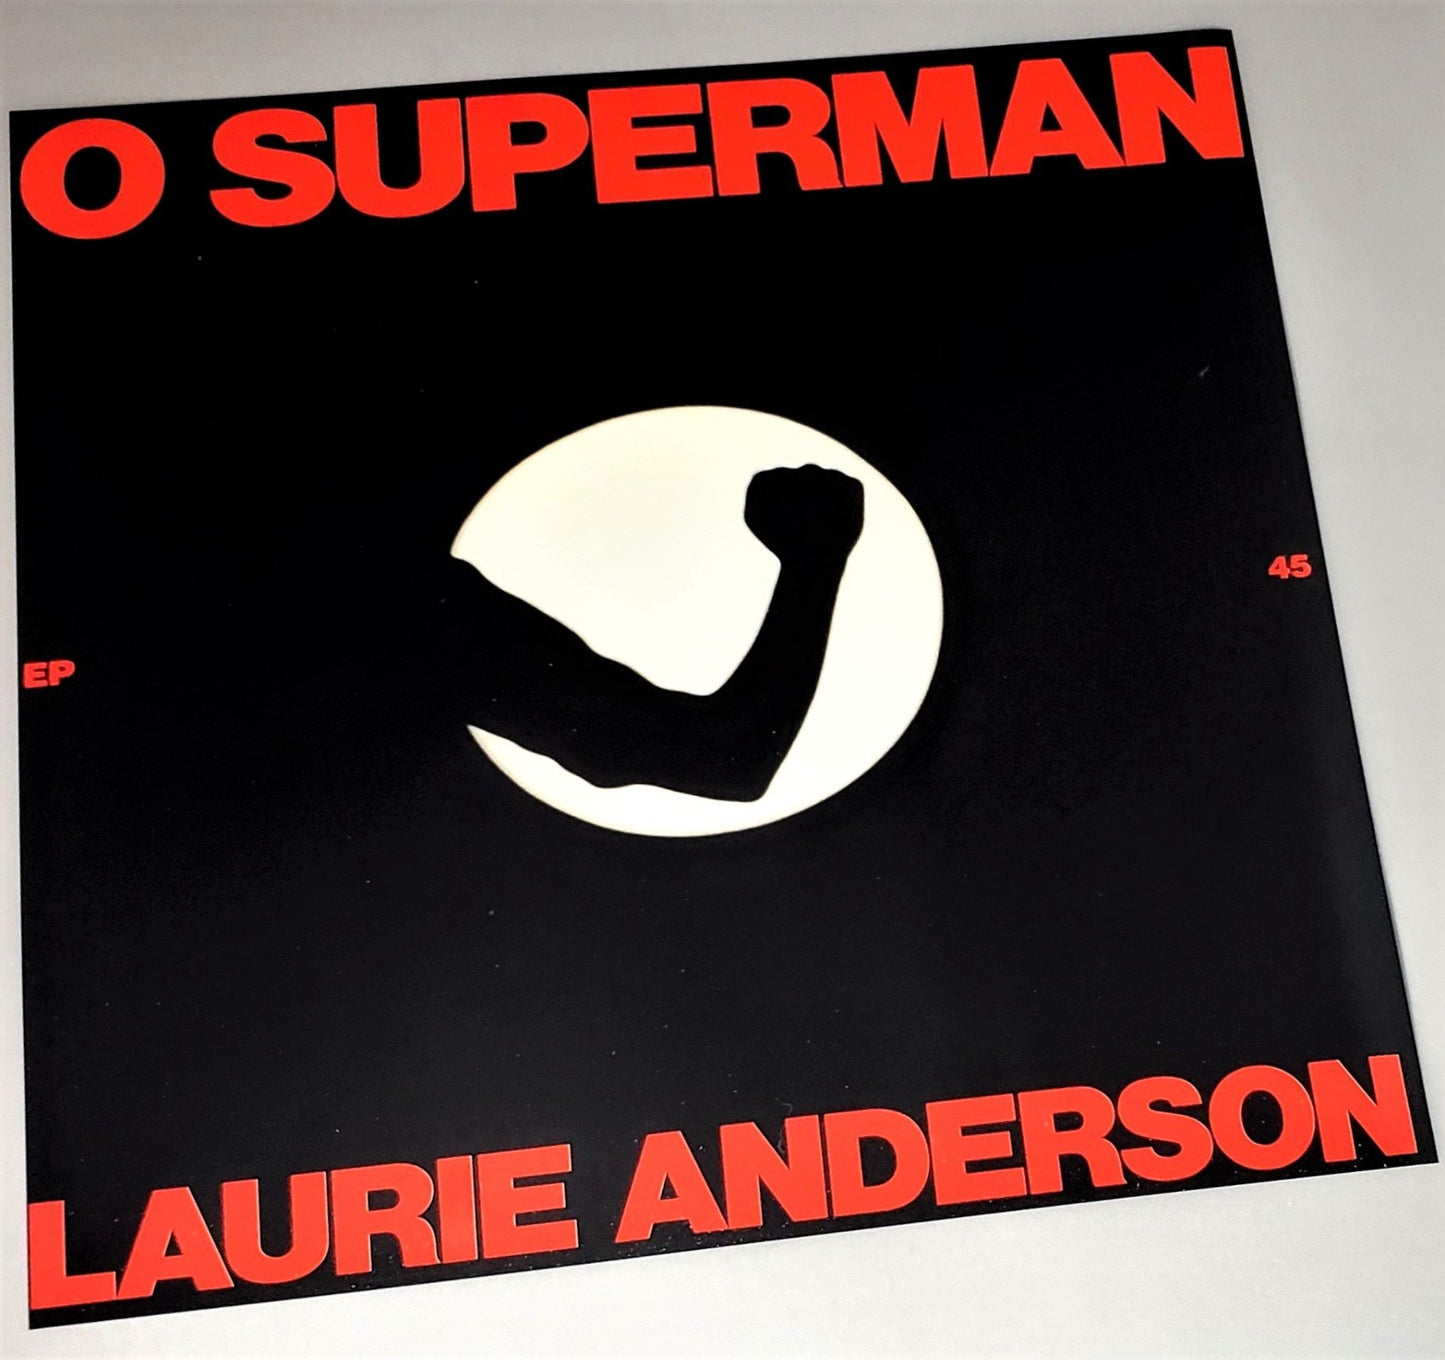 Laurie Anderson O Superman 12" LP cover original page art featured in 2017 Art Record Covers